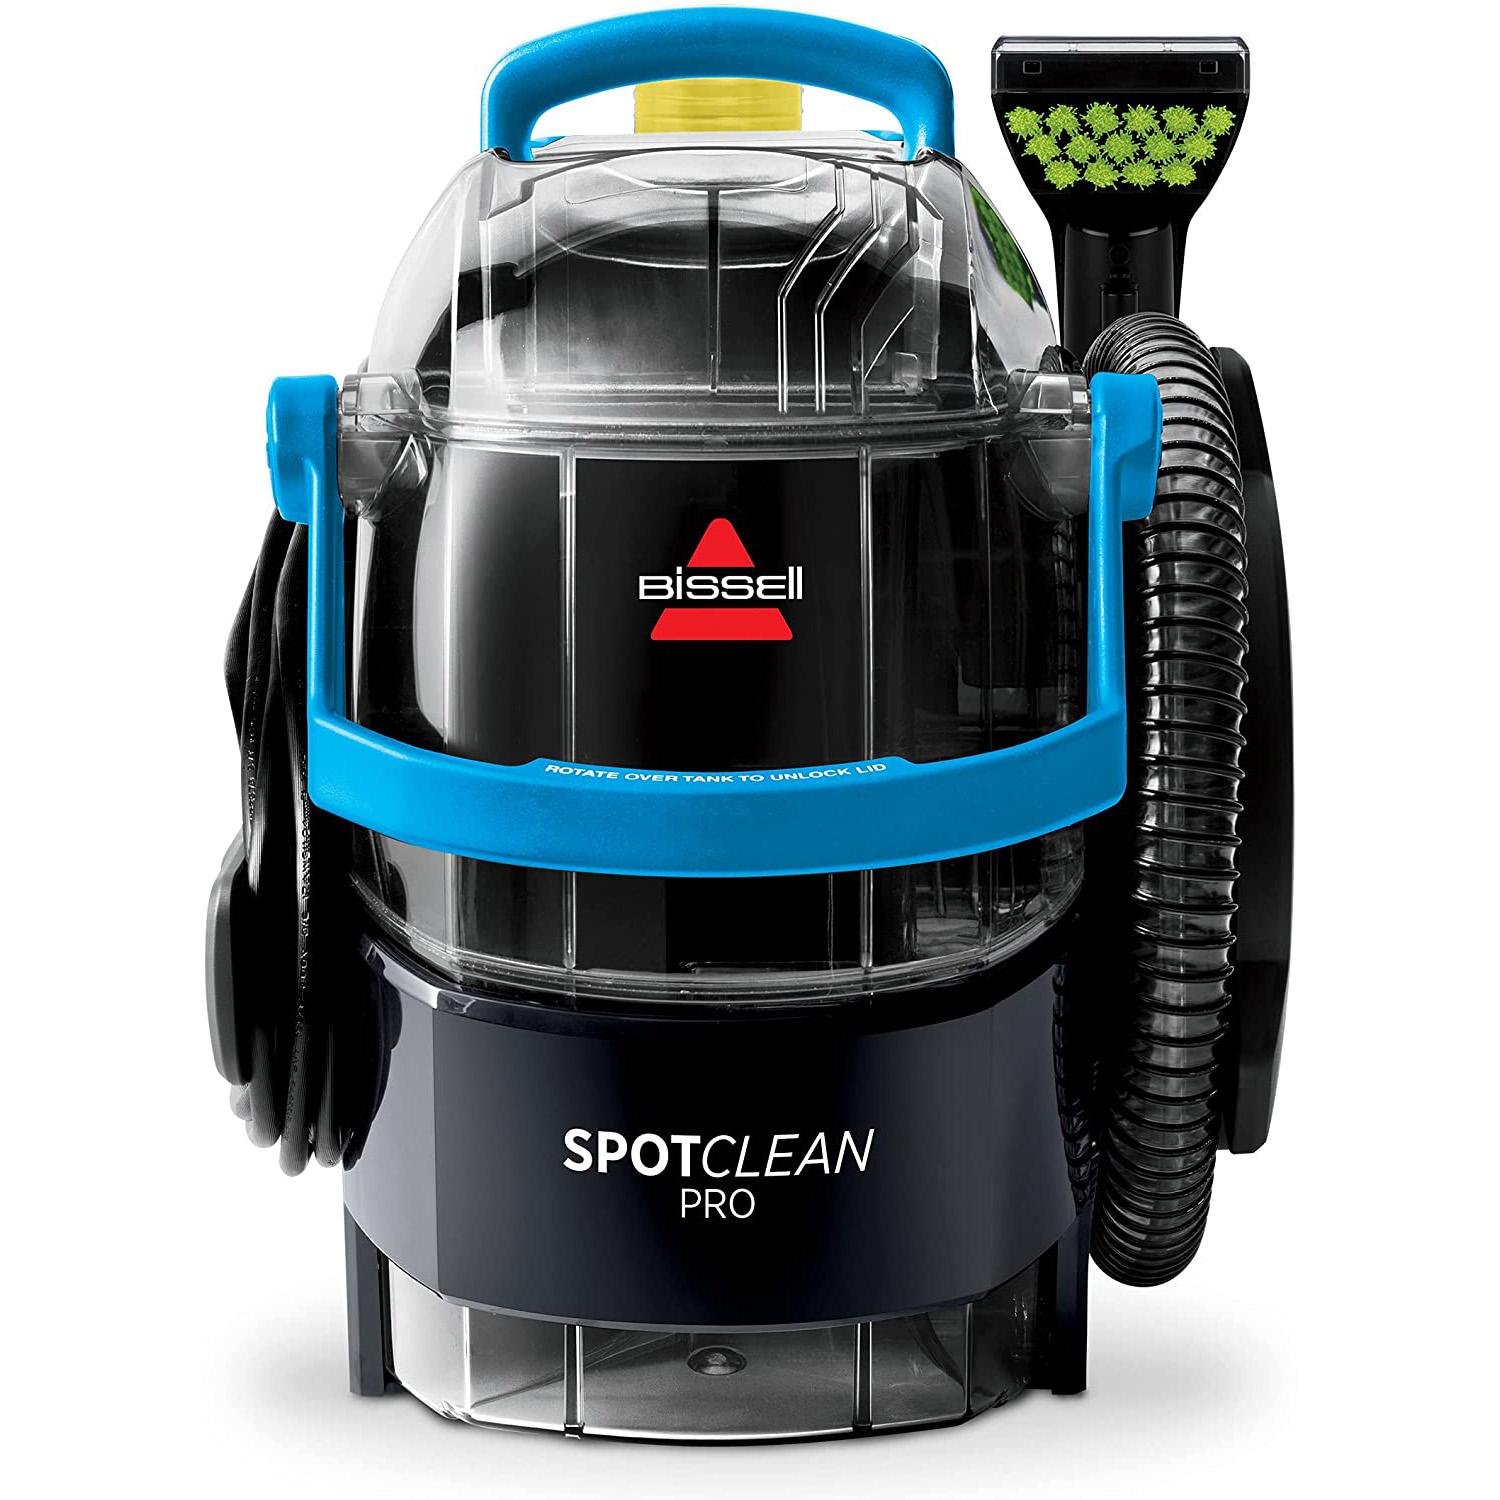 Bissell SpotClean Pro Portable Carpet Cleaner for $109.99 Shipped